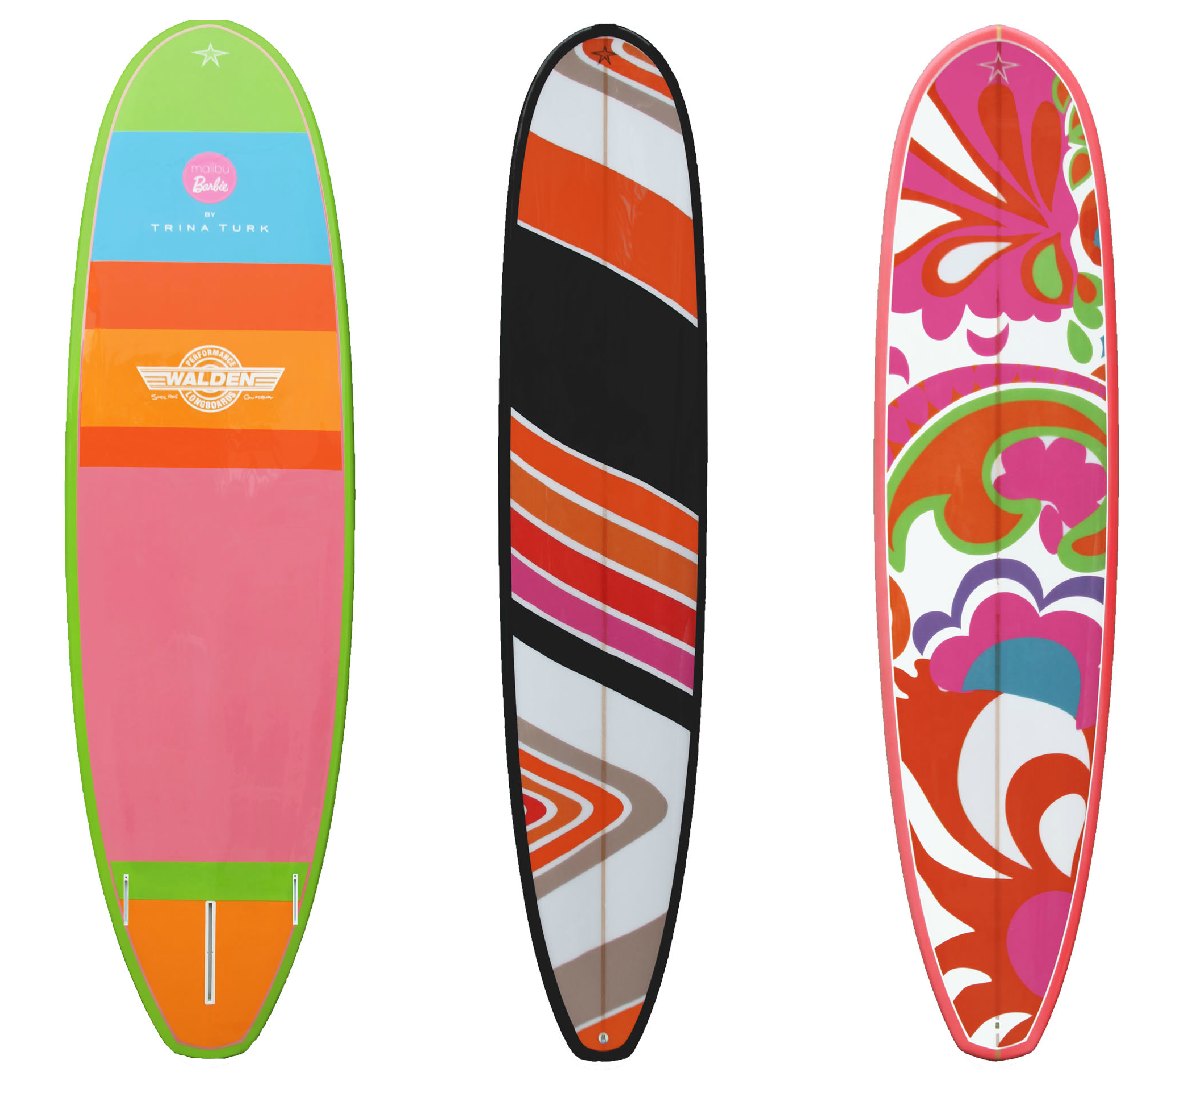 Walden Surfboards teams up with Barbie